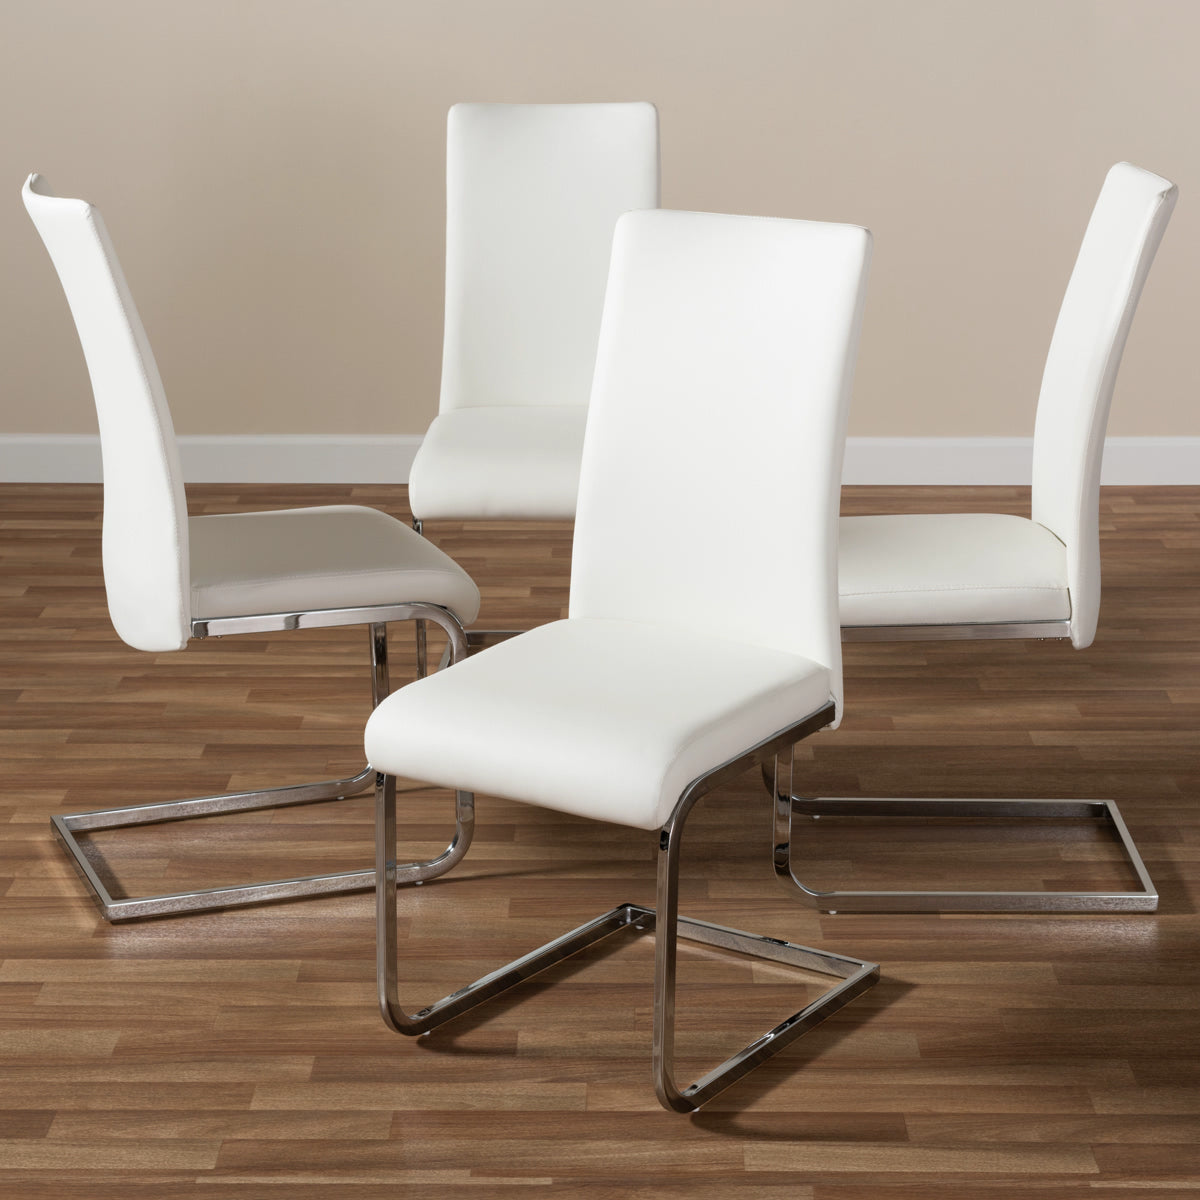 Baxton Studio Cyprien Modern and Contemporary White Faux Leather Upholstered Dining Chair (Set of 4) Baxton Studio-dining chair-Minimal And Modern - 4